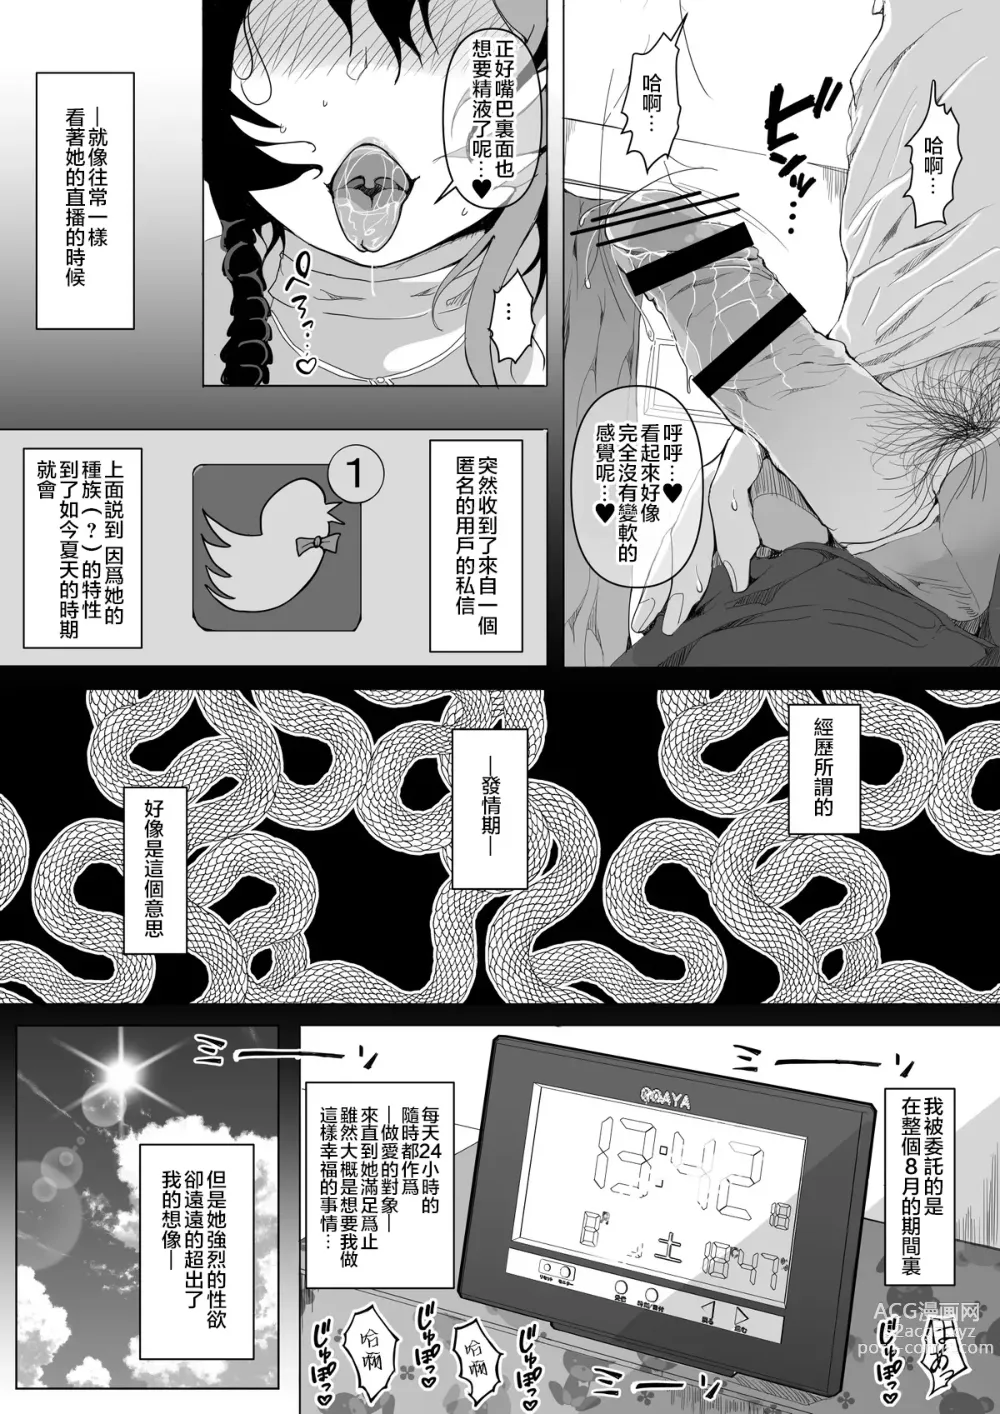 Page 3 of doujinshi Illustrations and other materials submitted to Fanbox from 2022/08 to 2023/10